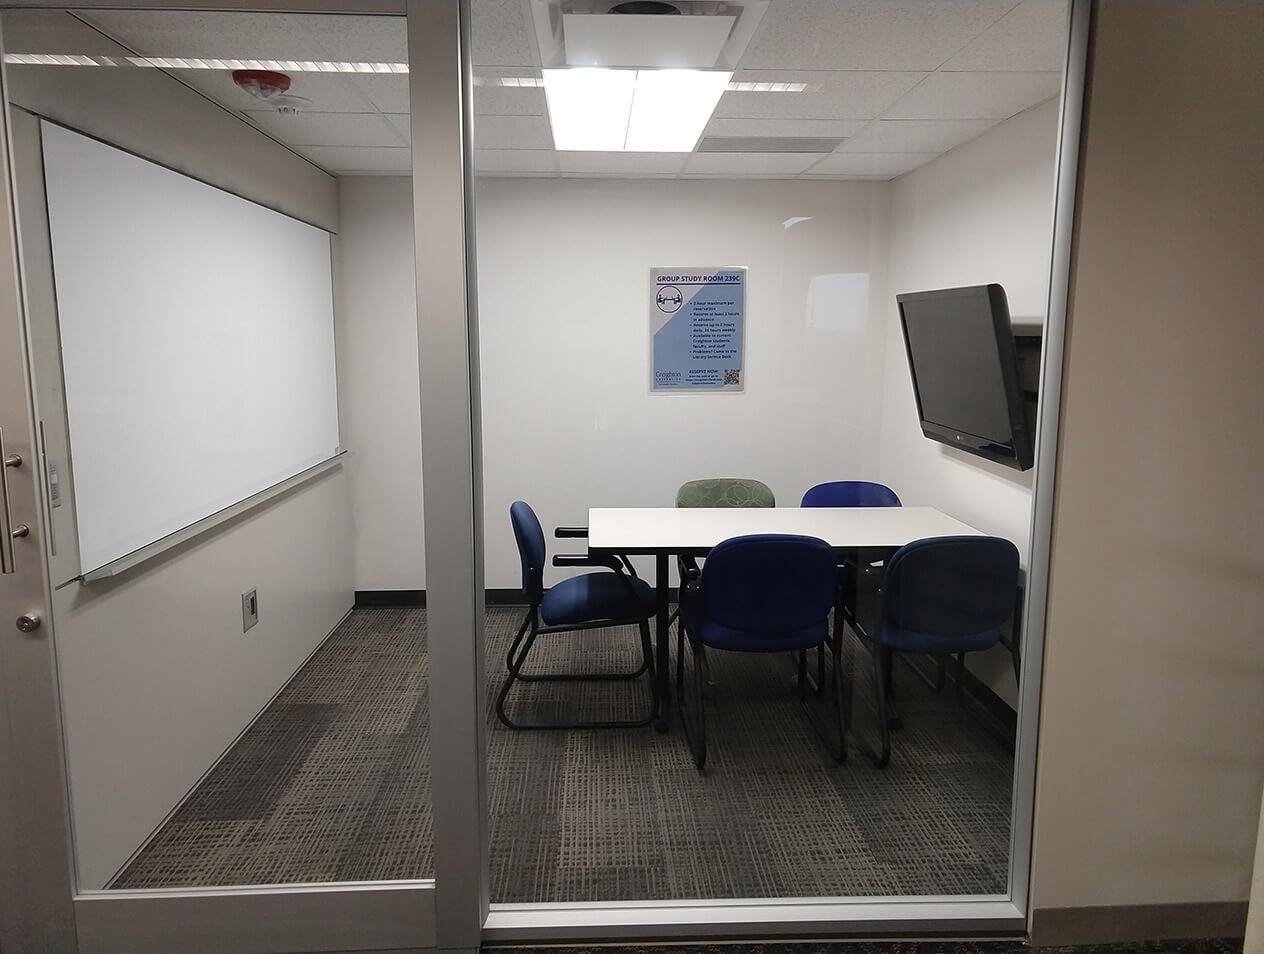 A study room in the Health Sciences Library with a table, chairs, whiteboard, and monitor